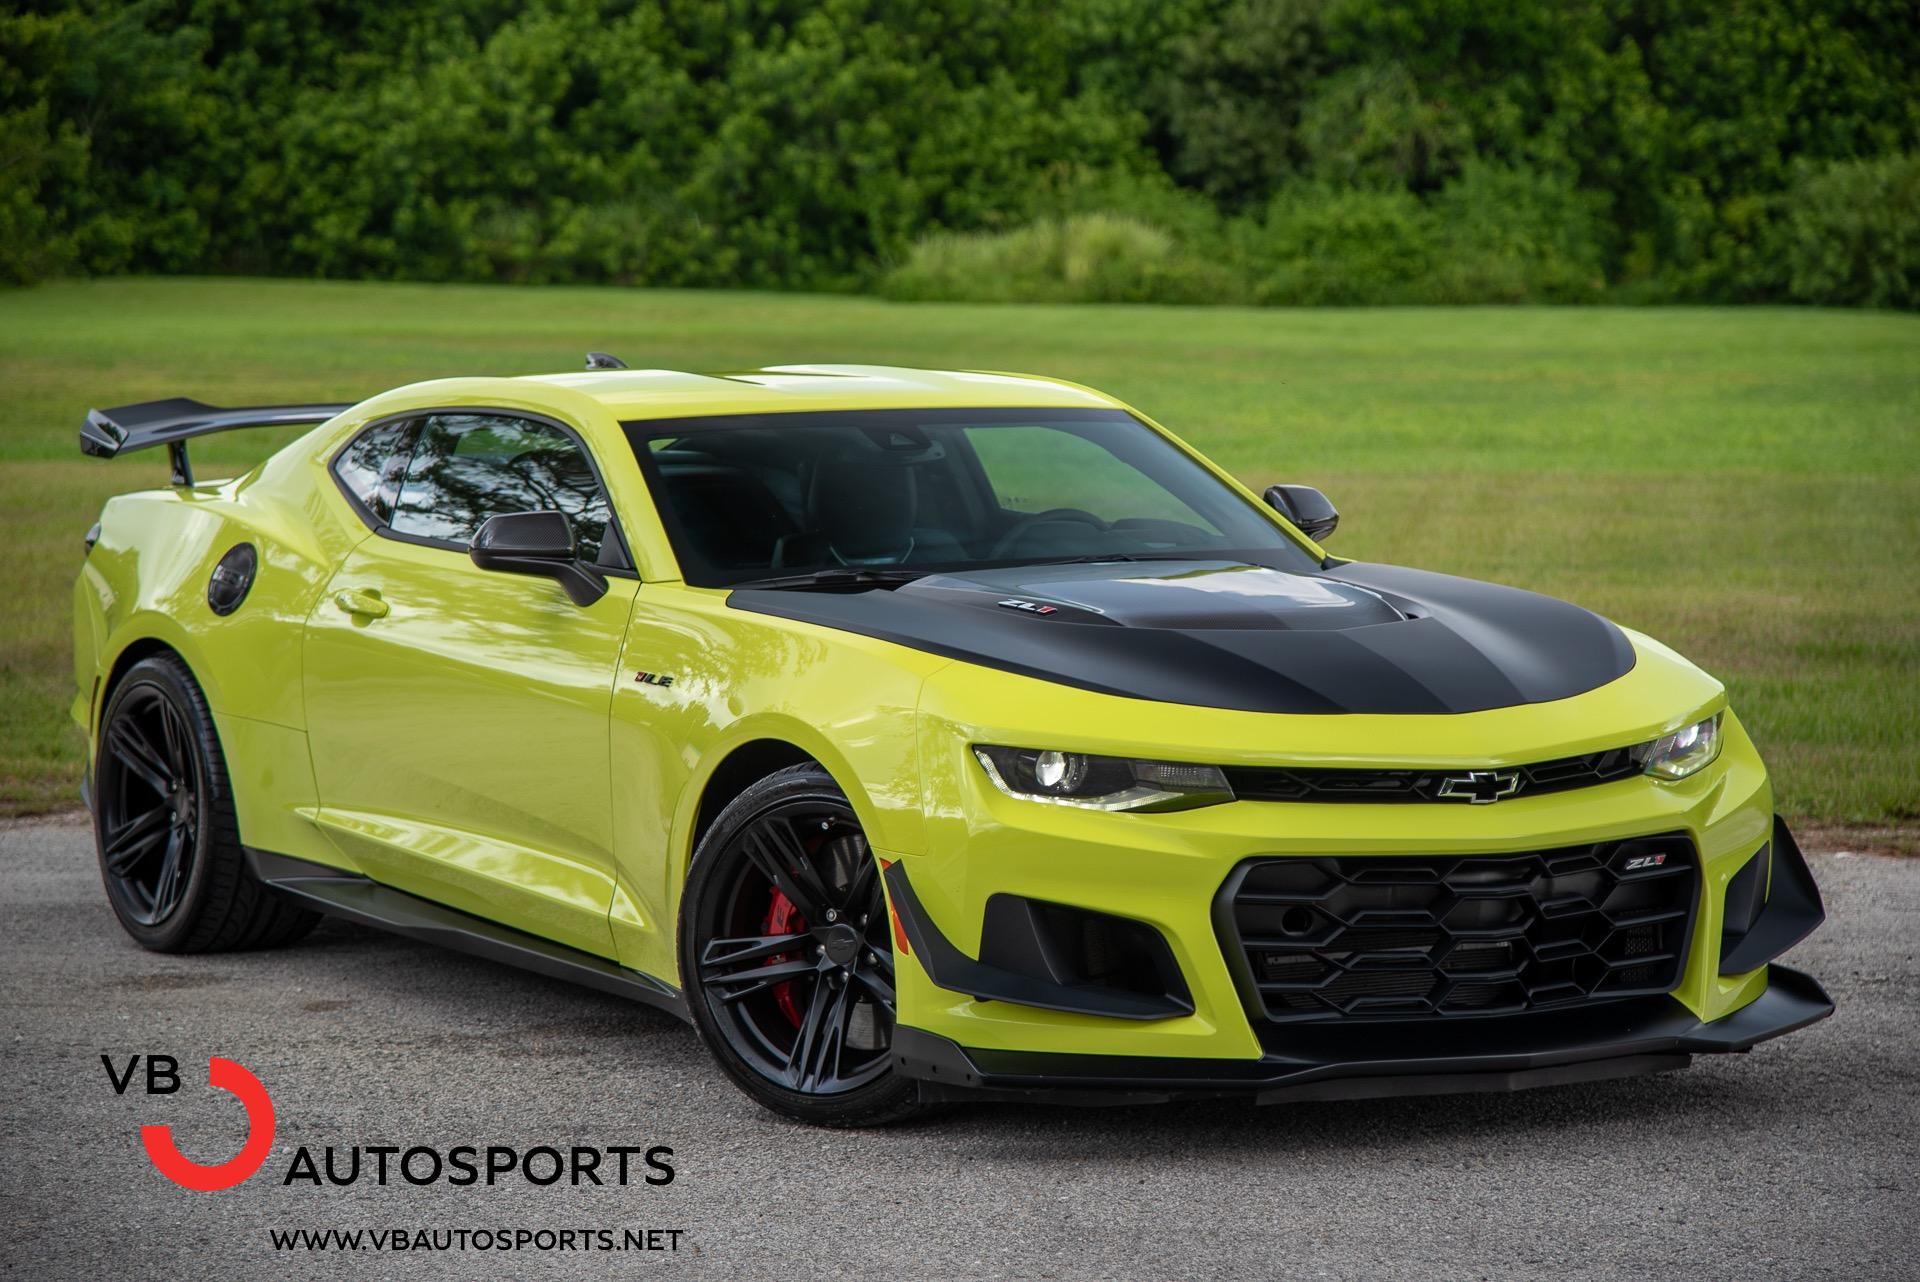 PreOwned 2020 Chevrolet Camaro ZL1 1LE For Sale (Sold) VB Autosports